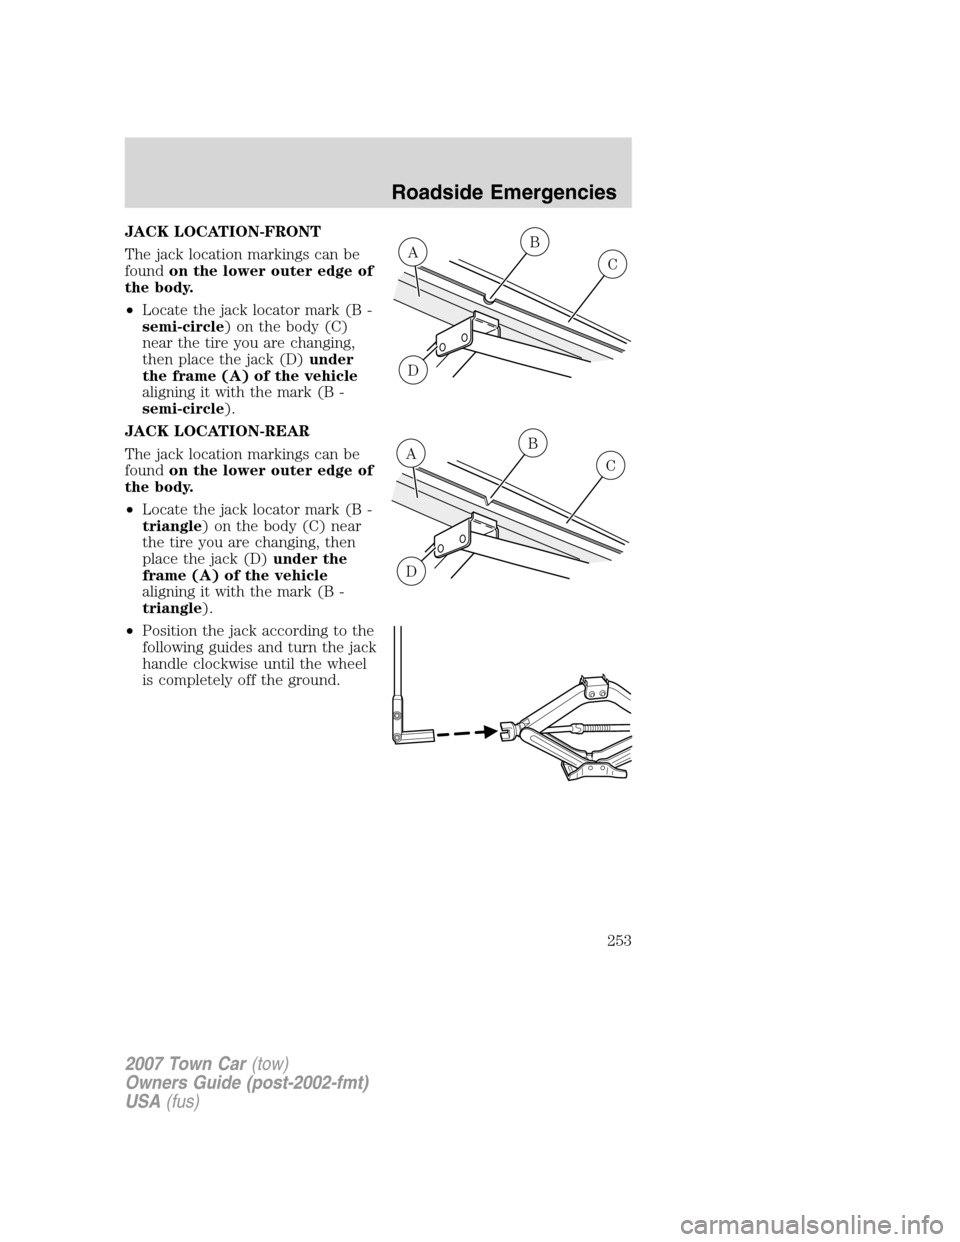 LINCOLN TOWN CAR 2007  Owners Manual JACK LOCATION-FRONT
The jack location markings can be
foundon the lower outer edge of
the body.
•Locate the jack locator mark (B -
semi-circle) on the body (C)
near the tire you are changing,
then p